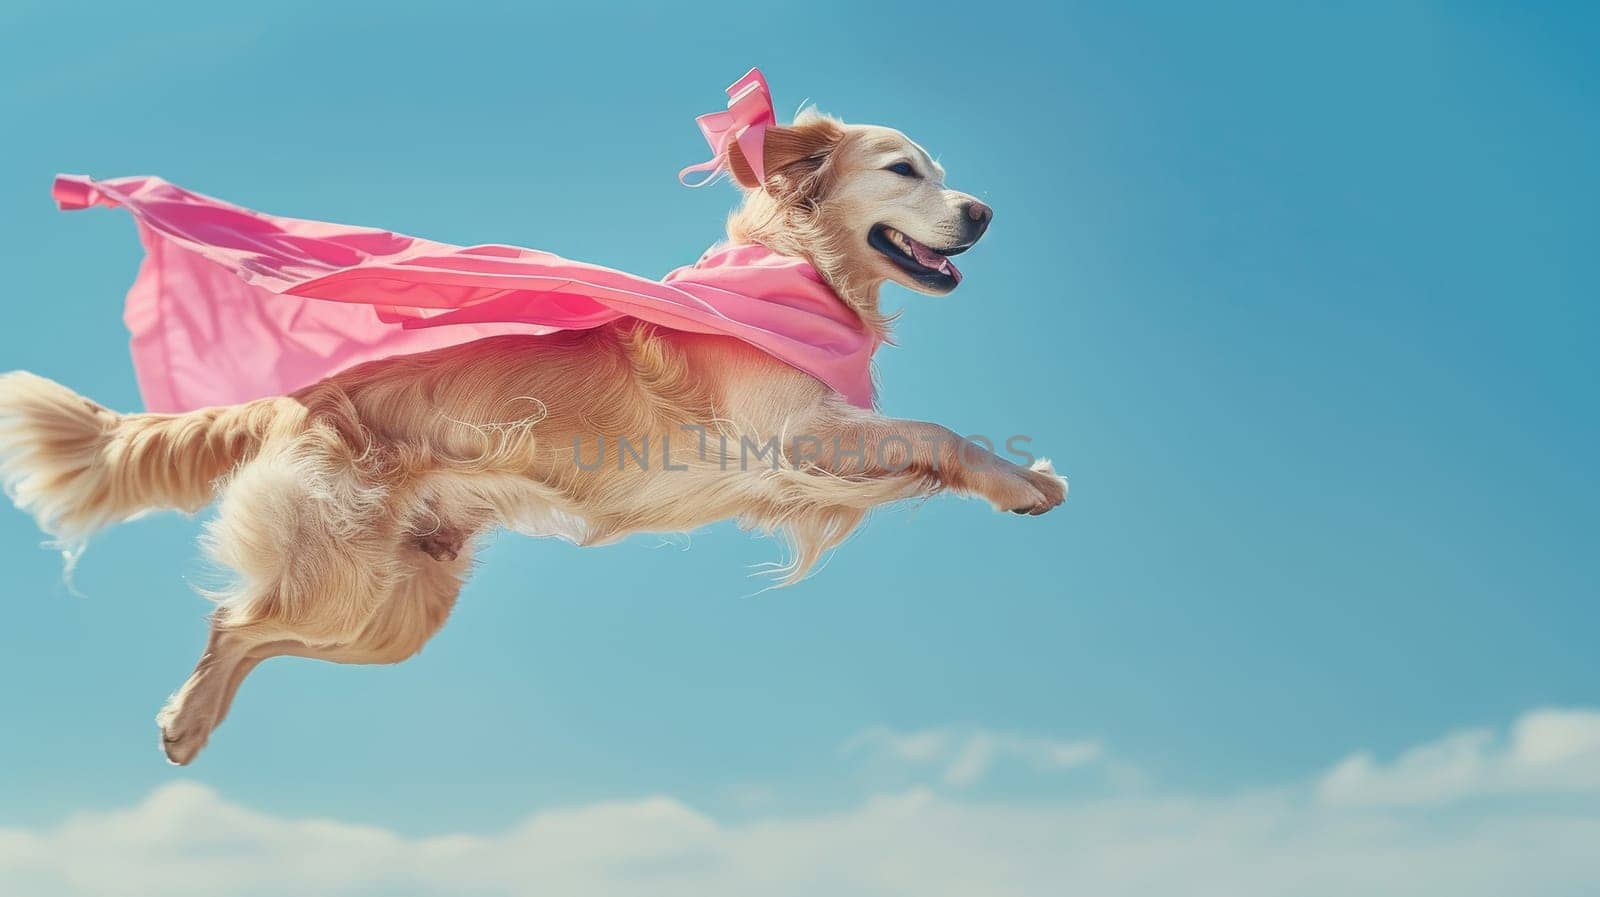 A dog is flying through the air with a pink cape on. The dog is wearing a pink crown and he is having fun